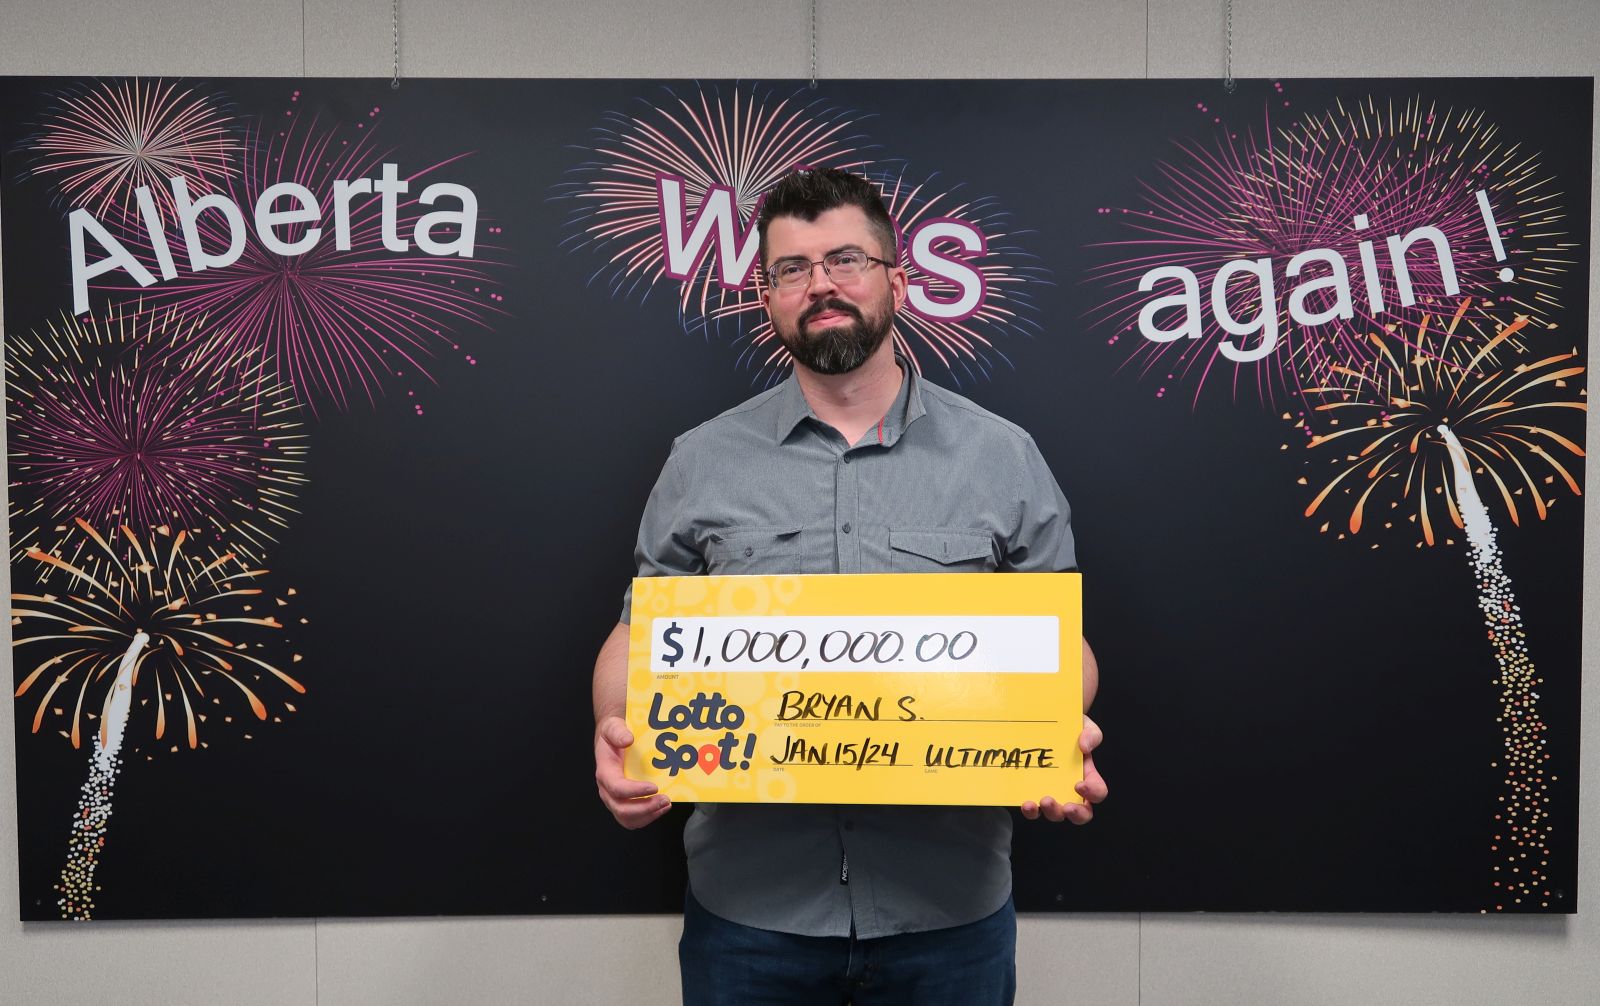 Edmonton man’s $1M New Year’s Day scratch ticket win saw him ‘squeal’ with delight